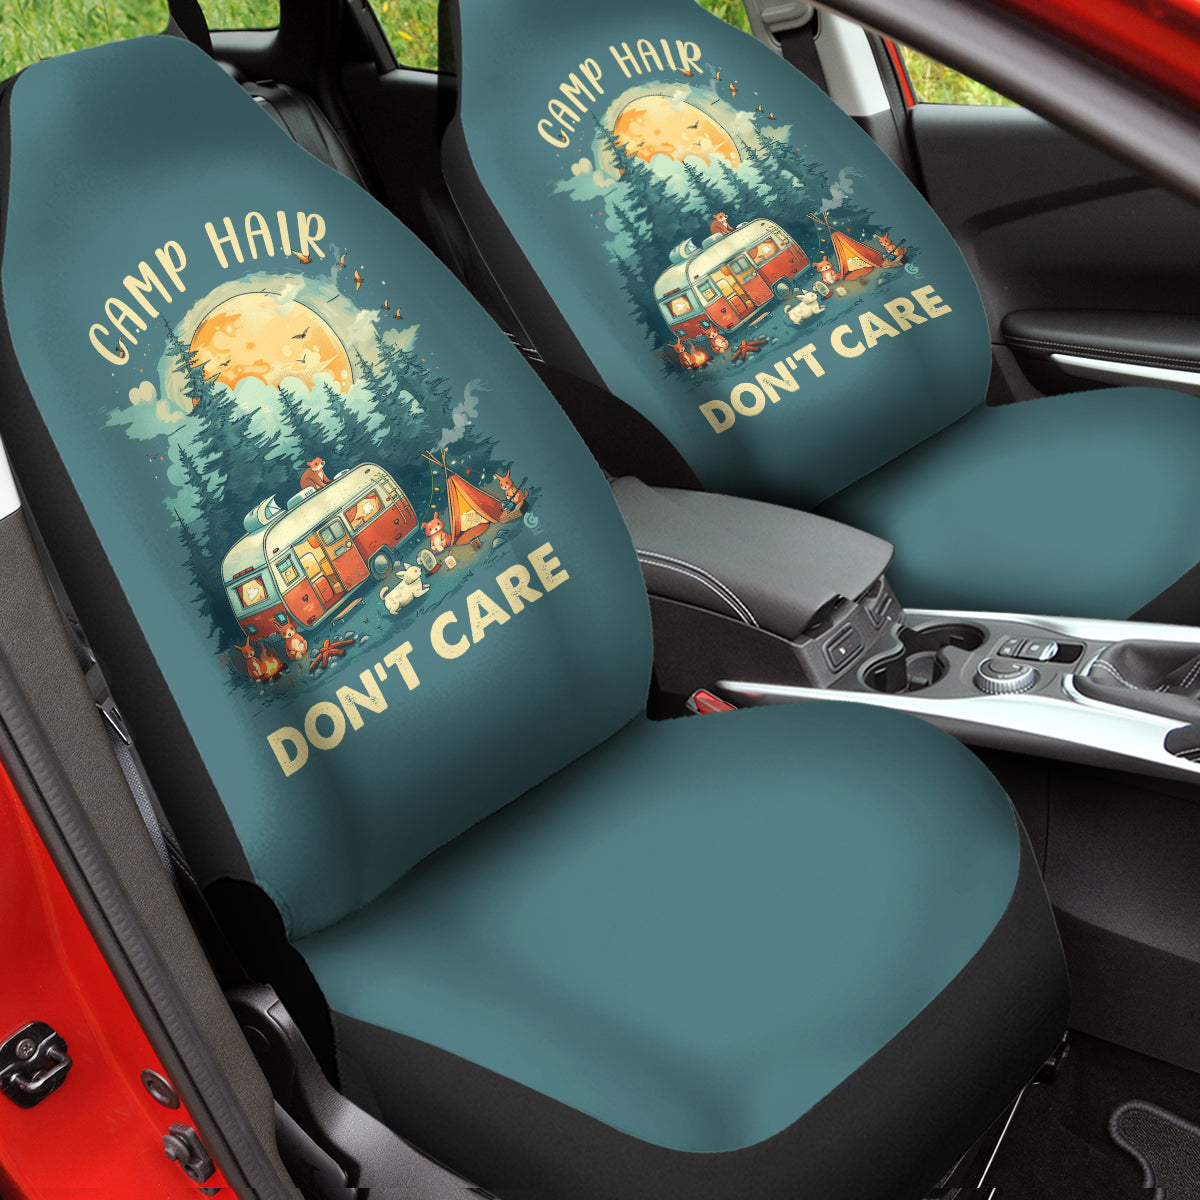 Camping Hair Don't Care Car Seat Covers Washable Breathable Car Seat Wrap Universal Fits Most Auto Truck Van SUV Car Seat Wrap, Camp Hair Don't Care 03